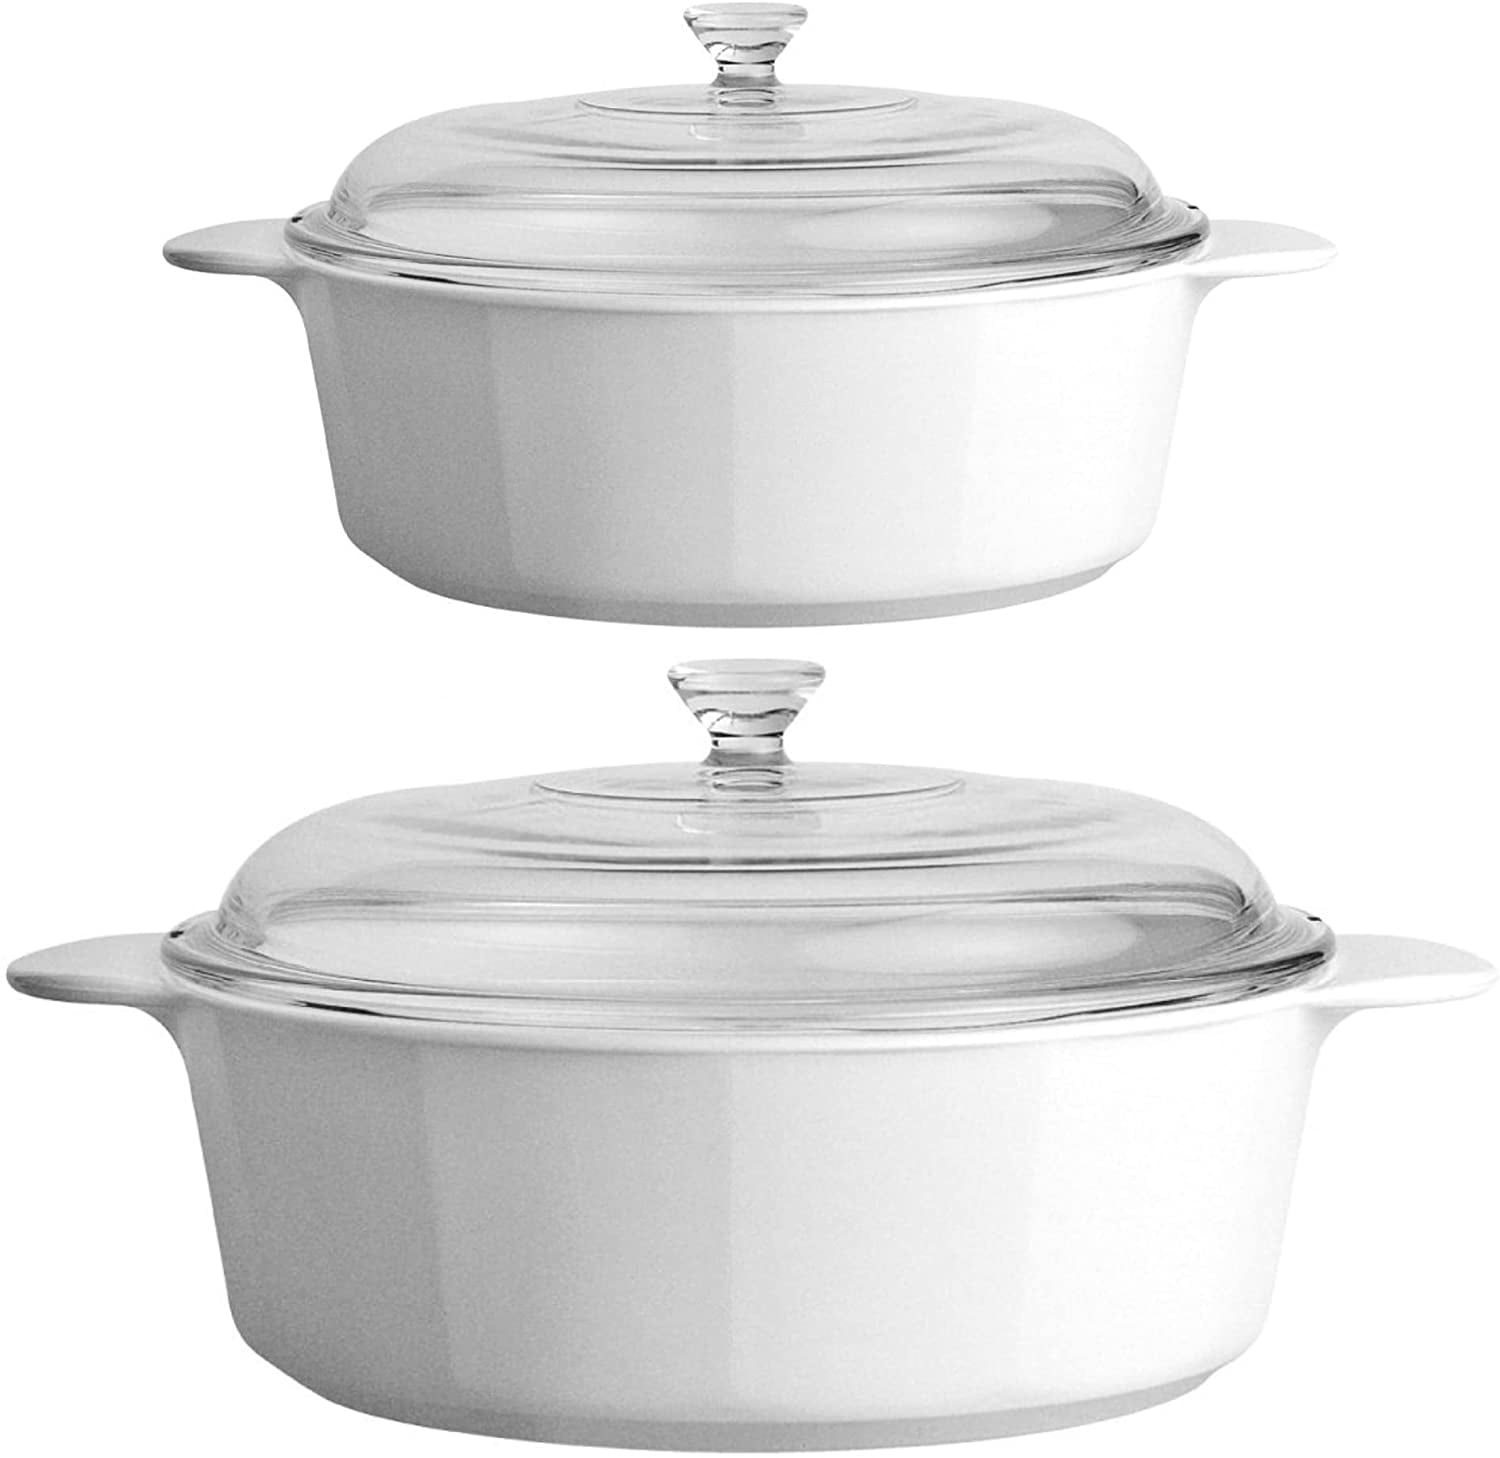 Visions 2.25L Glass Dutch Oven/Casserole Dish with Glass Lid 